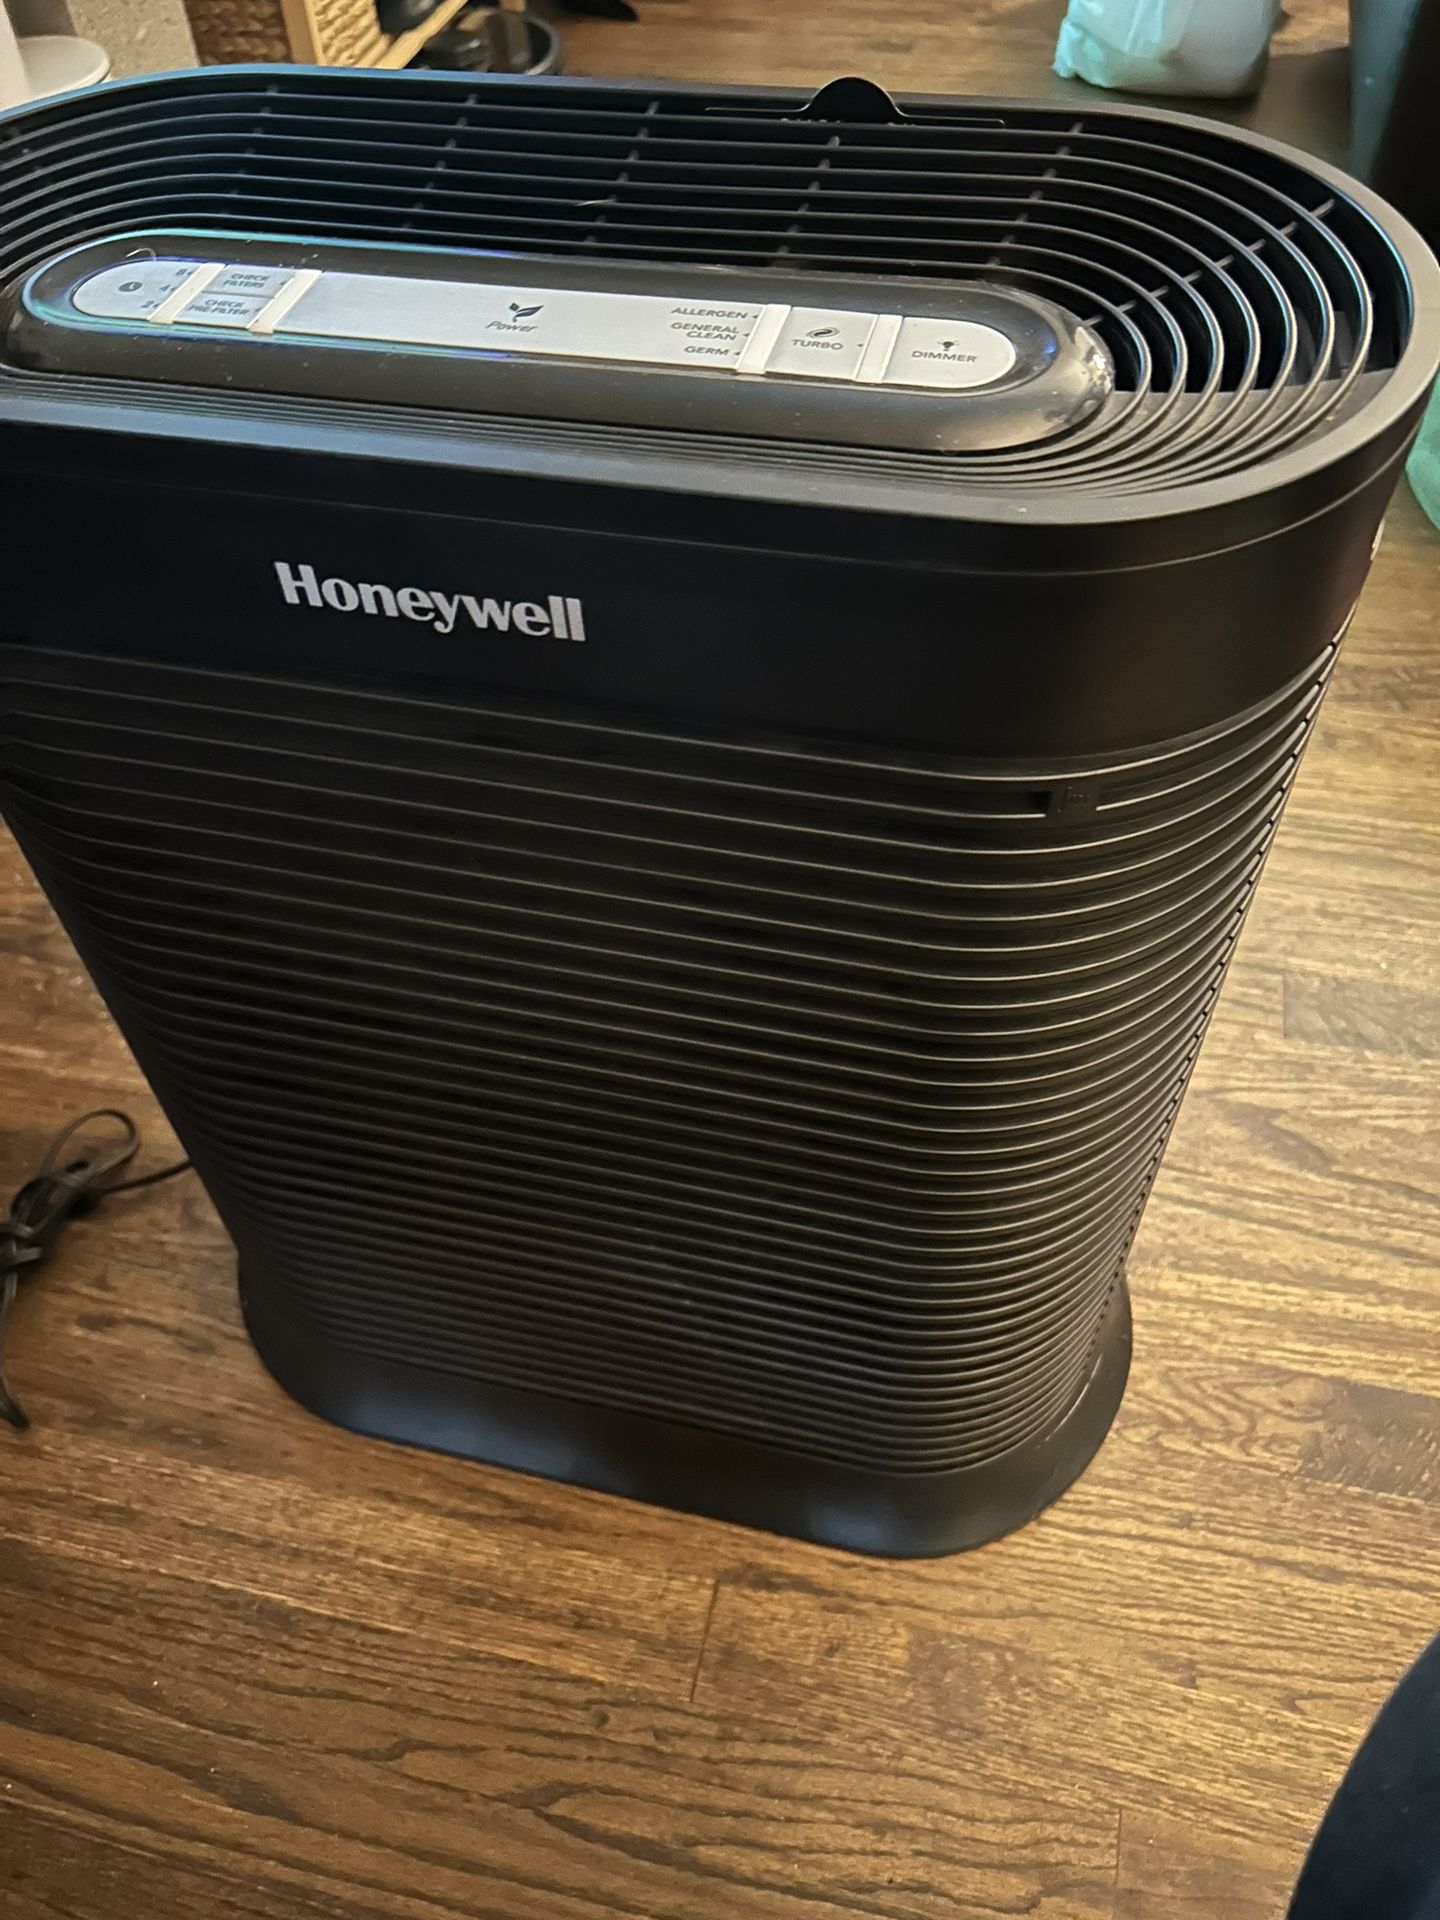 Honeywell Air Purifier Nice Unit Need Gone Still Great Condition  70 Firm  Used 